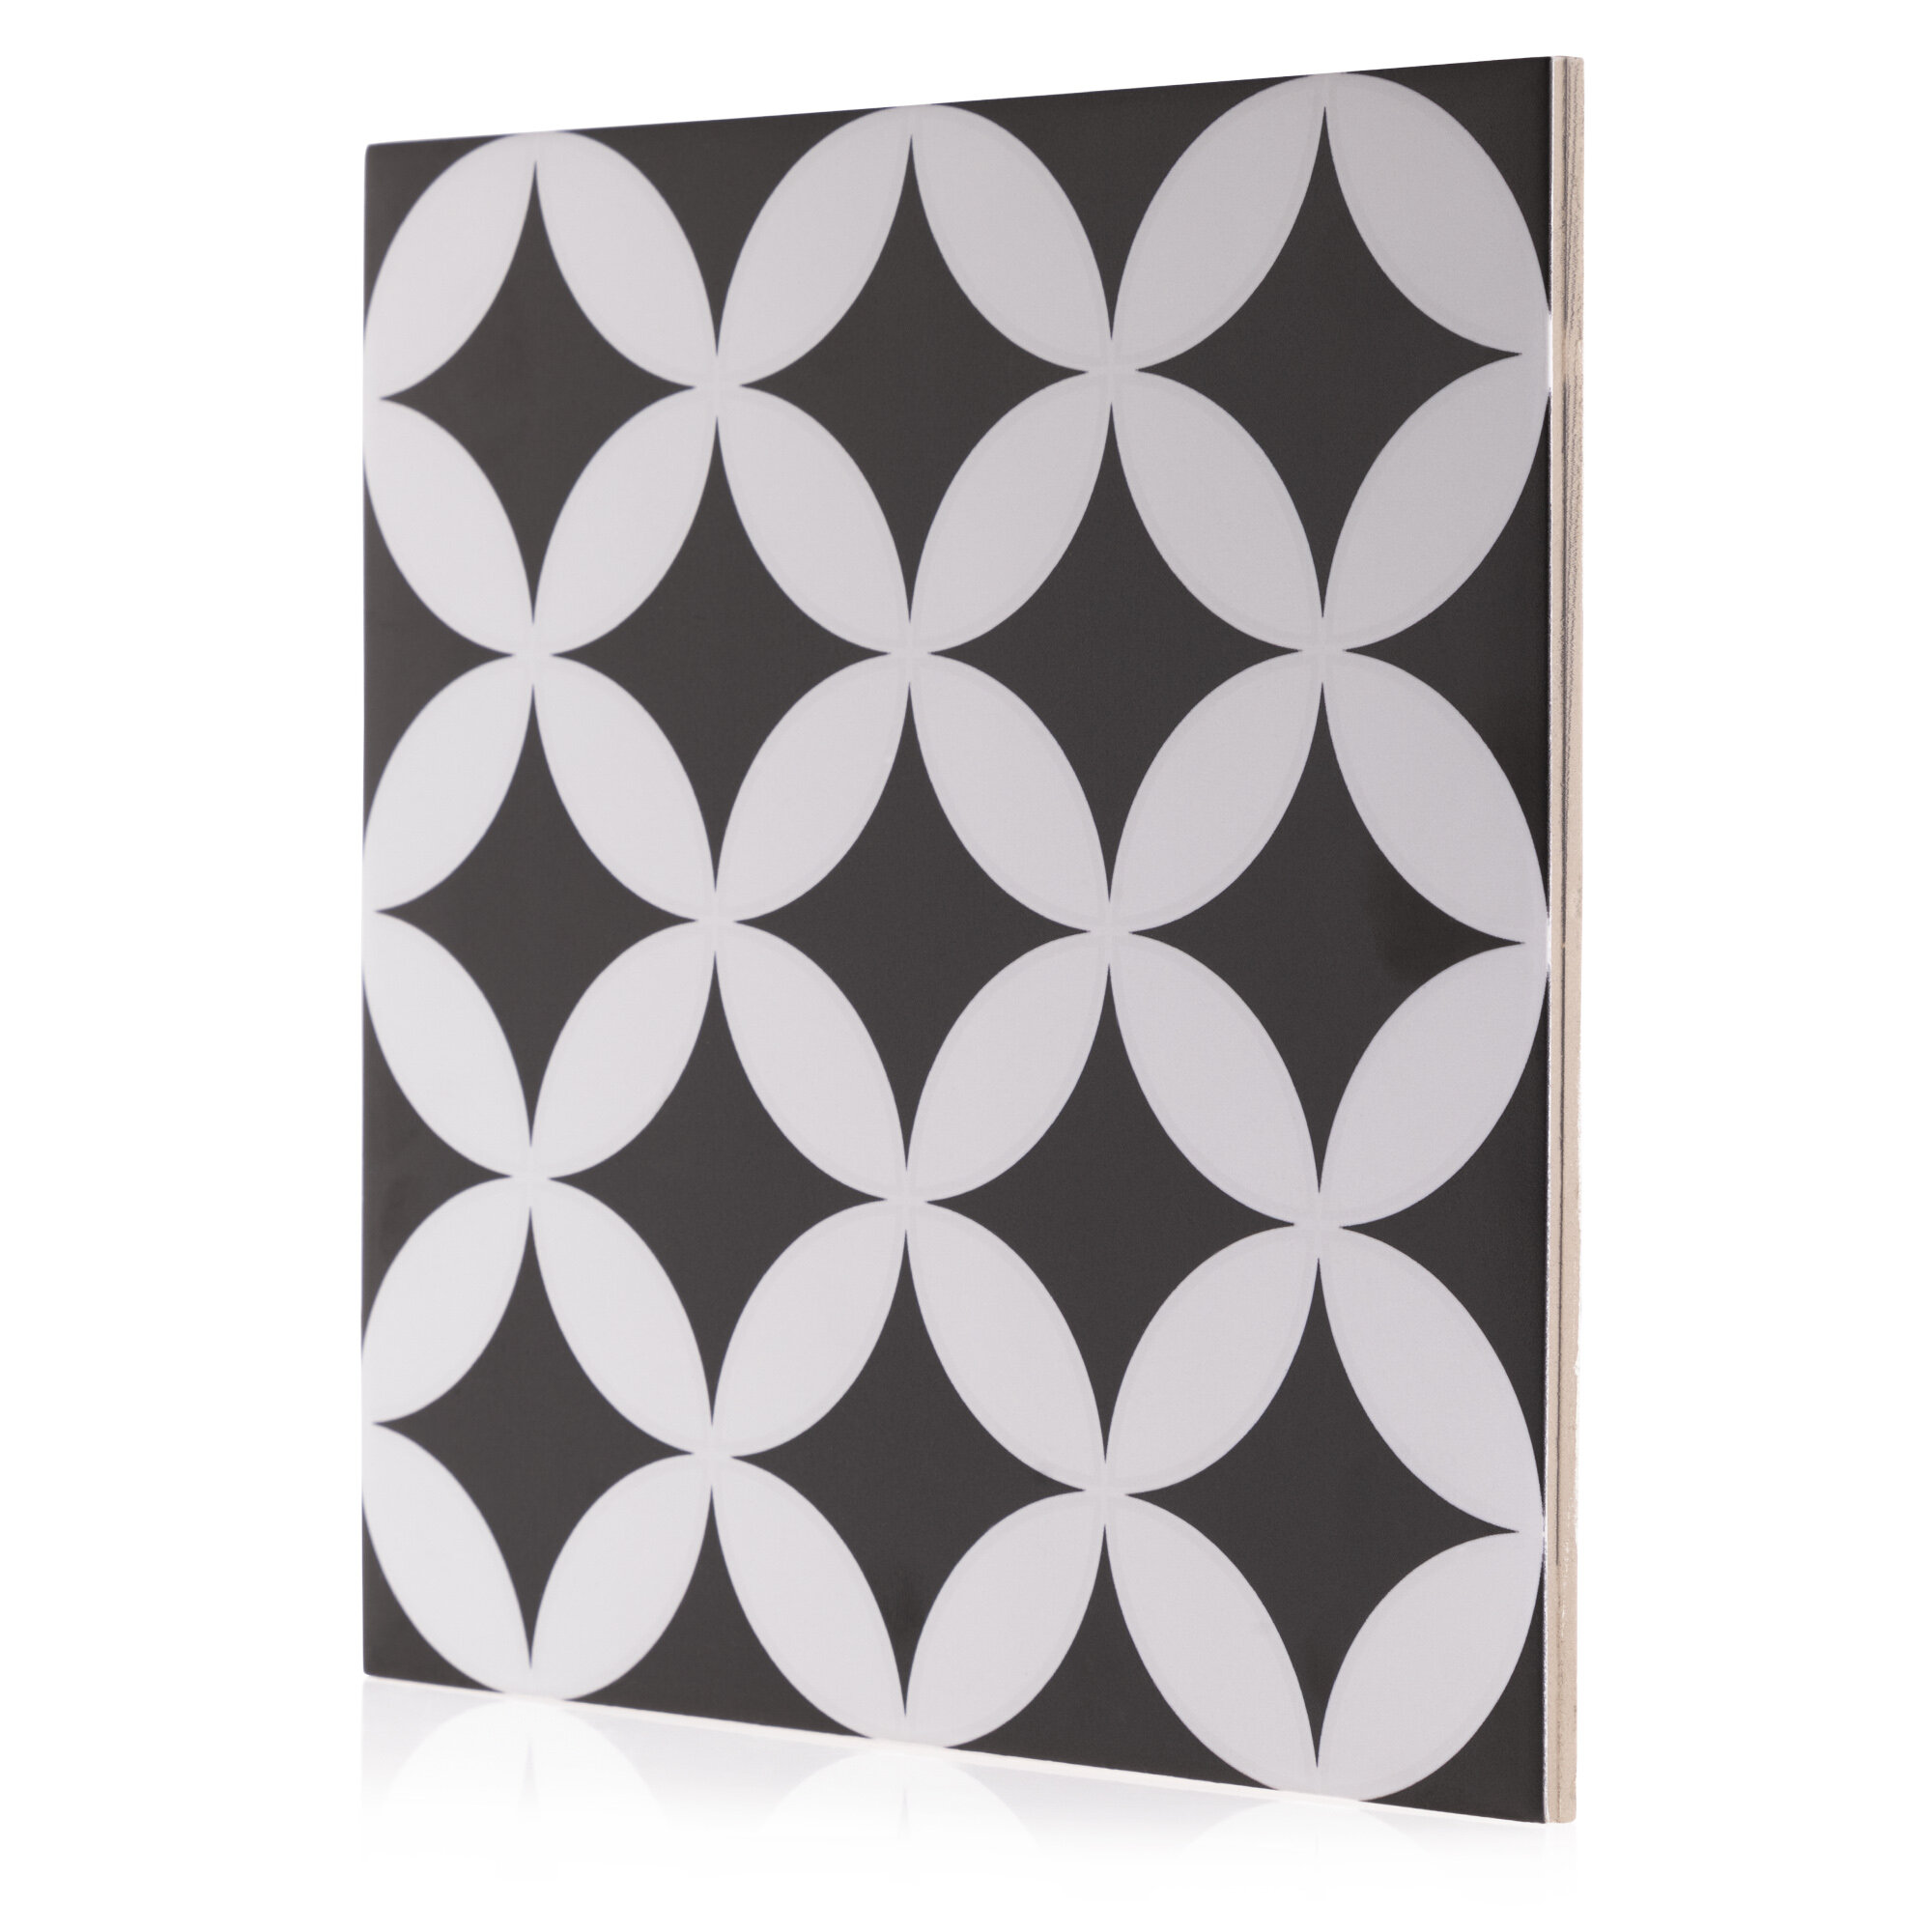 8x8 Inch Beveled Edge Mirror Tiles Pack Of 25